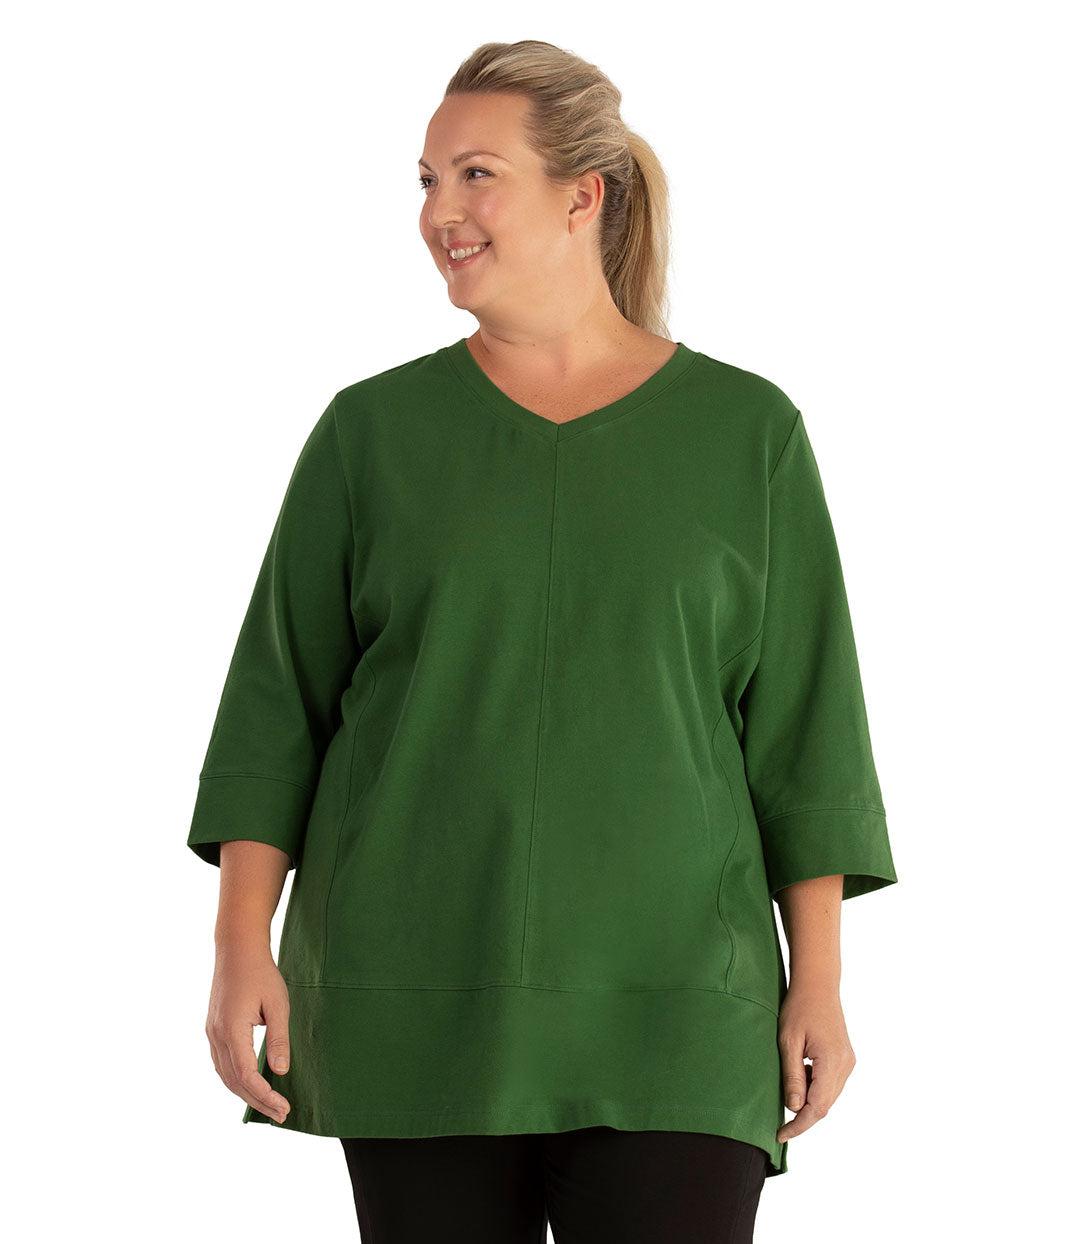 Plus size woman, facing front, wearing JunoActive plus size Stretch Naturals Princess V-neck Tunic in the color Evergreen. She is wearing JunoActive Plus Size Leggings in the color Black.